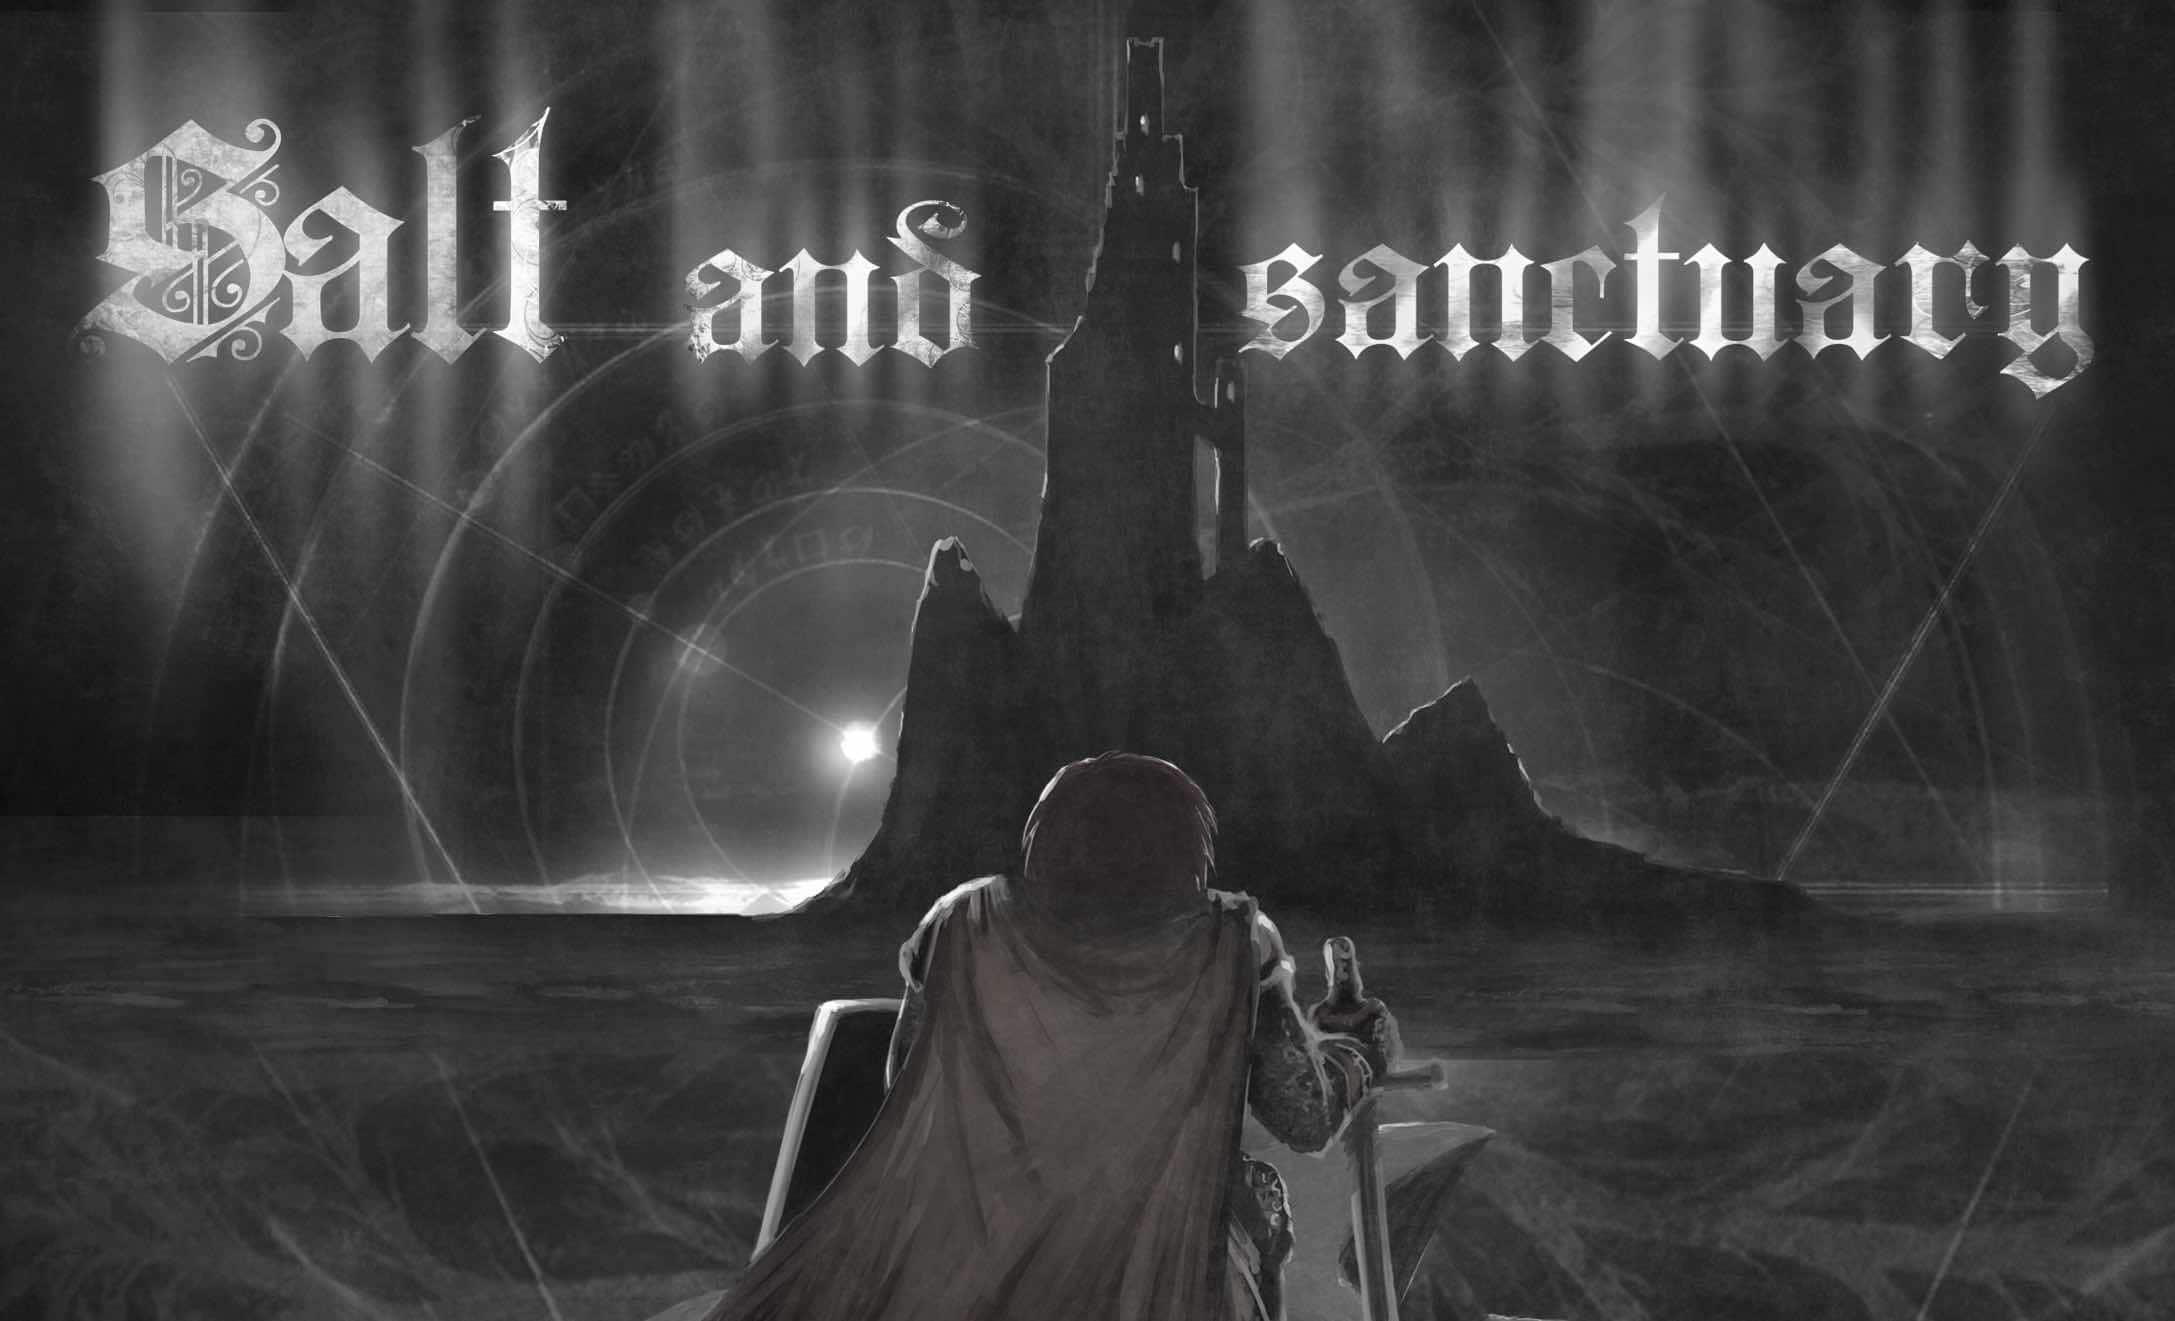 Will salt and sanctuary be on steam фото 30